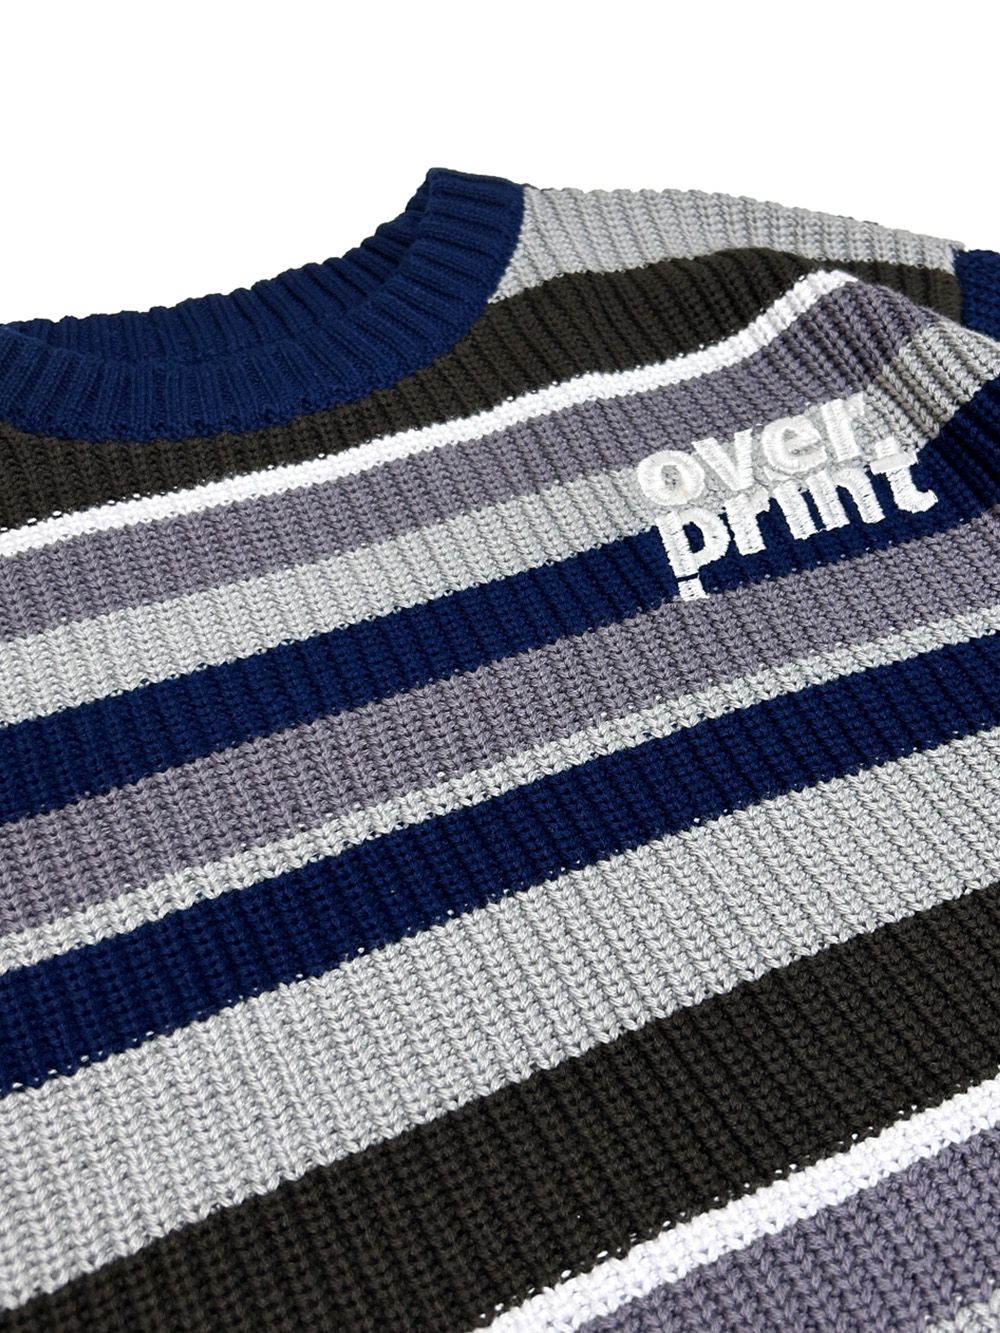 over print - boader cotton knit | DOLL